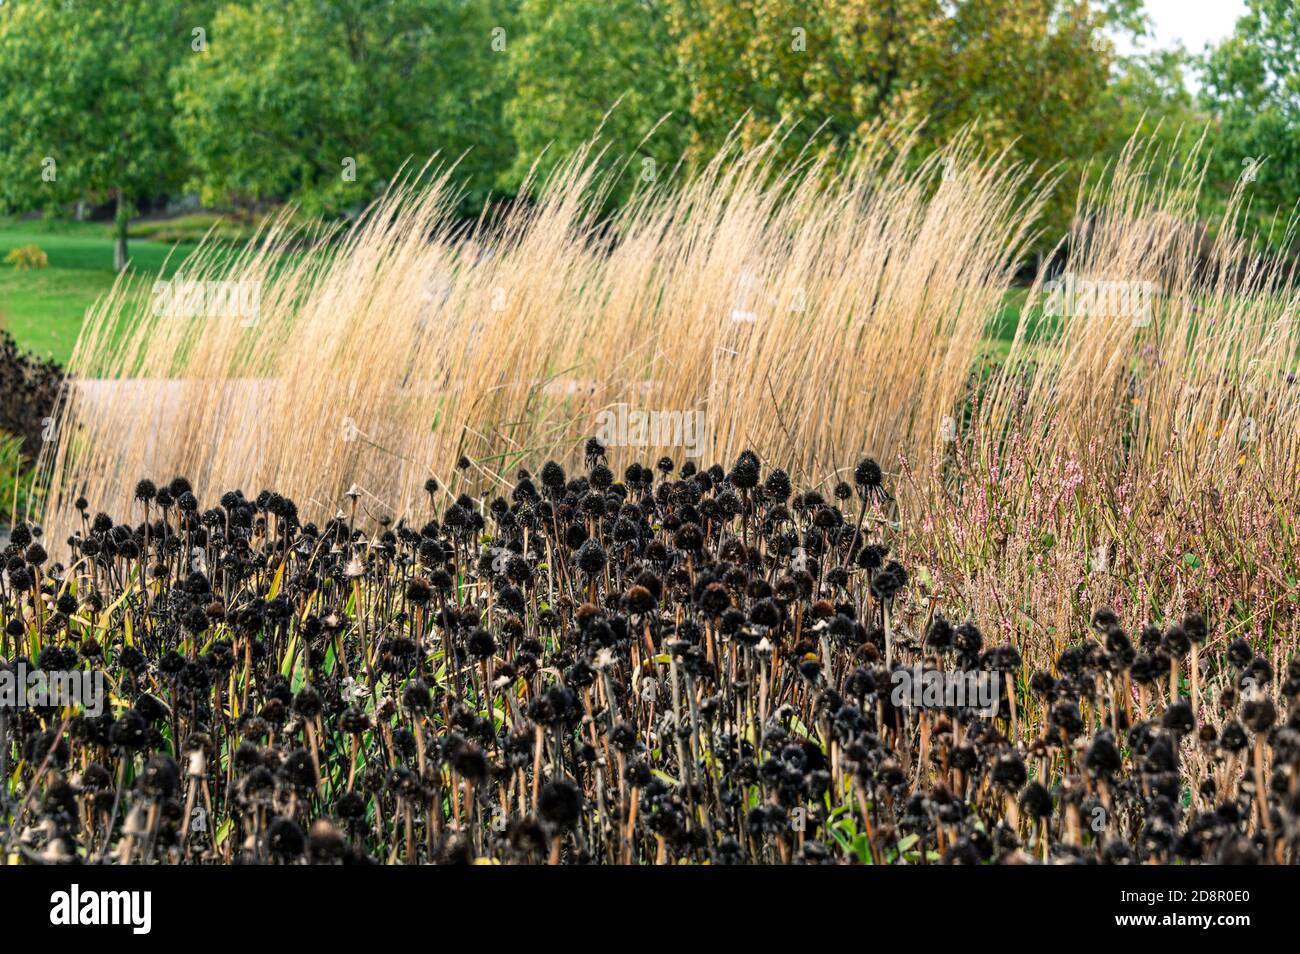 Autumn view, seed heads with grasses behind. Displaying autumnal tones. Stock Photo